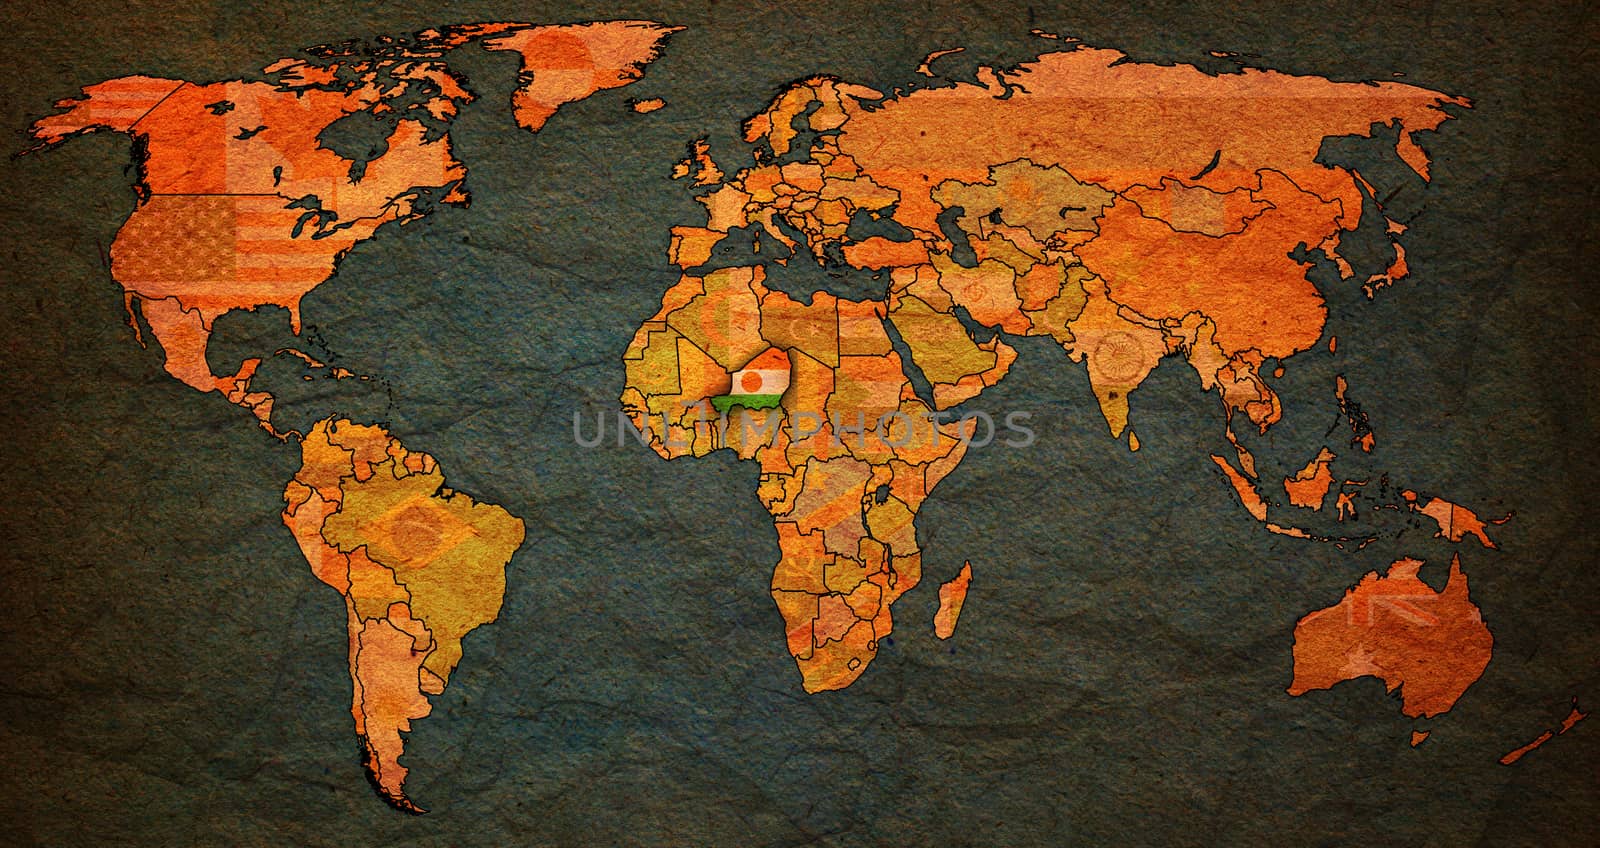 niger territory on world map by michal812